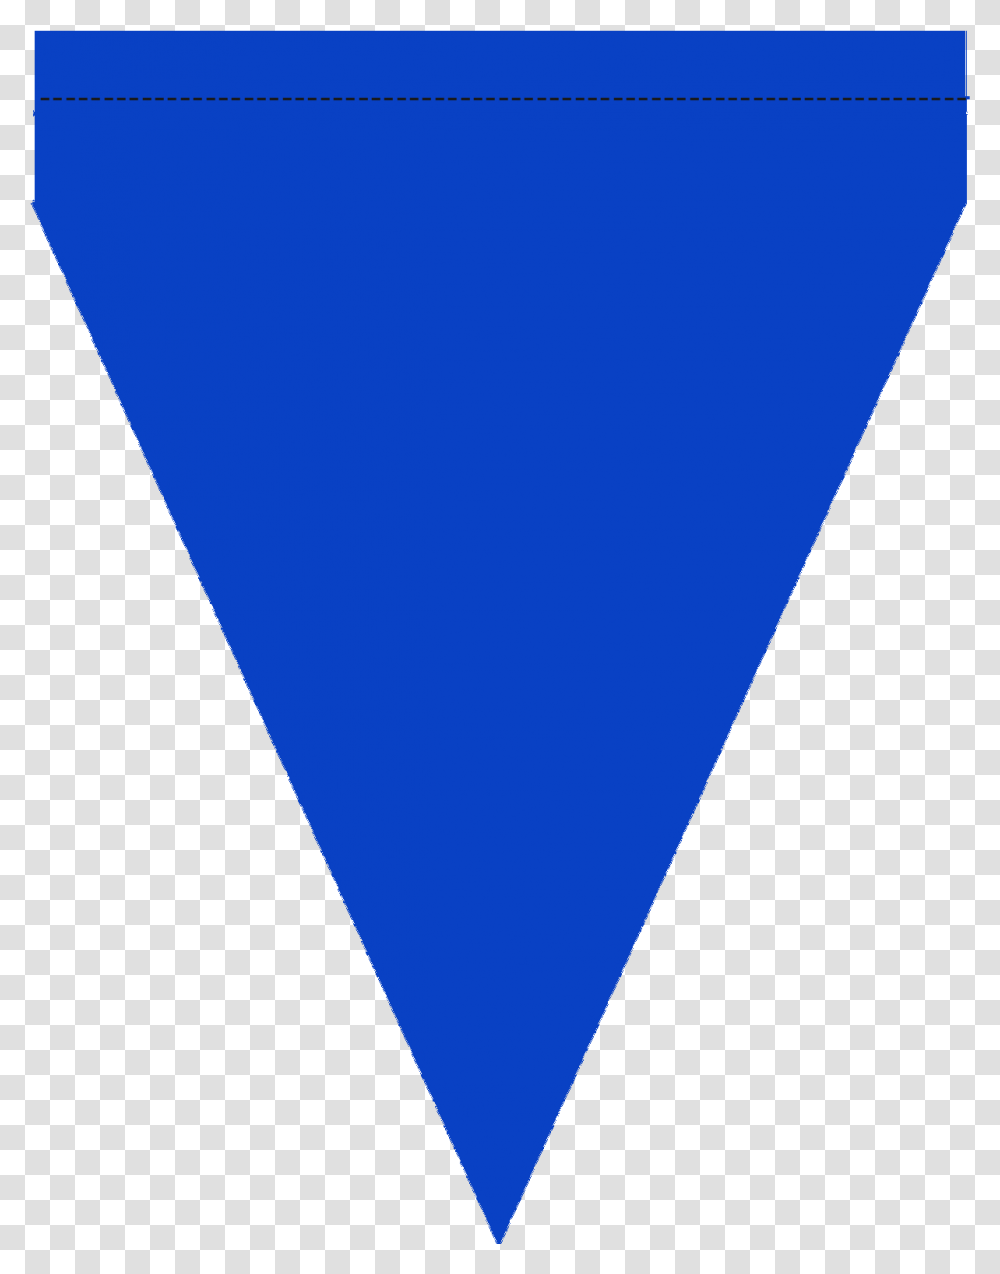 Free Printable Blue Green Blue Upside Down Triangle, Plectrum Transparent Png